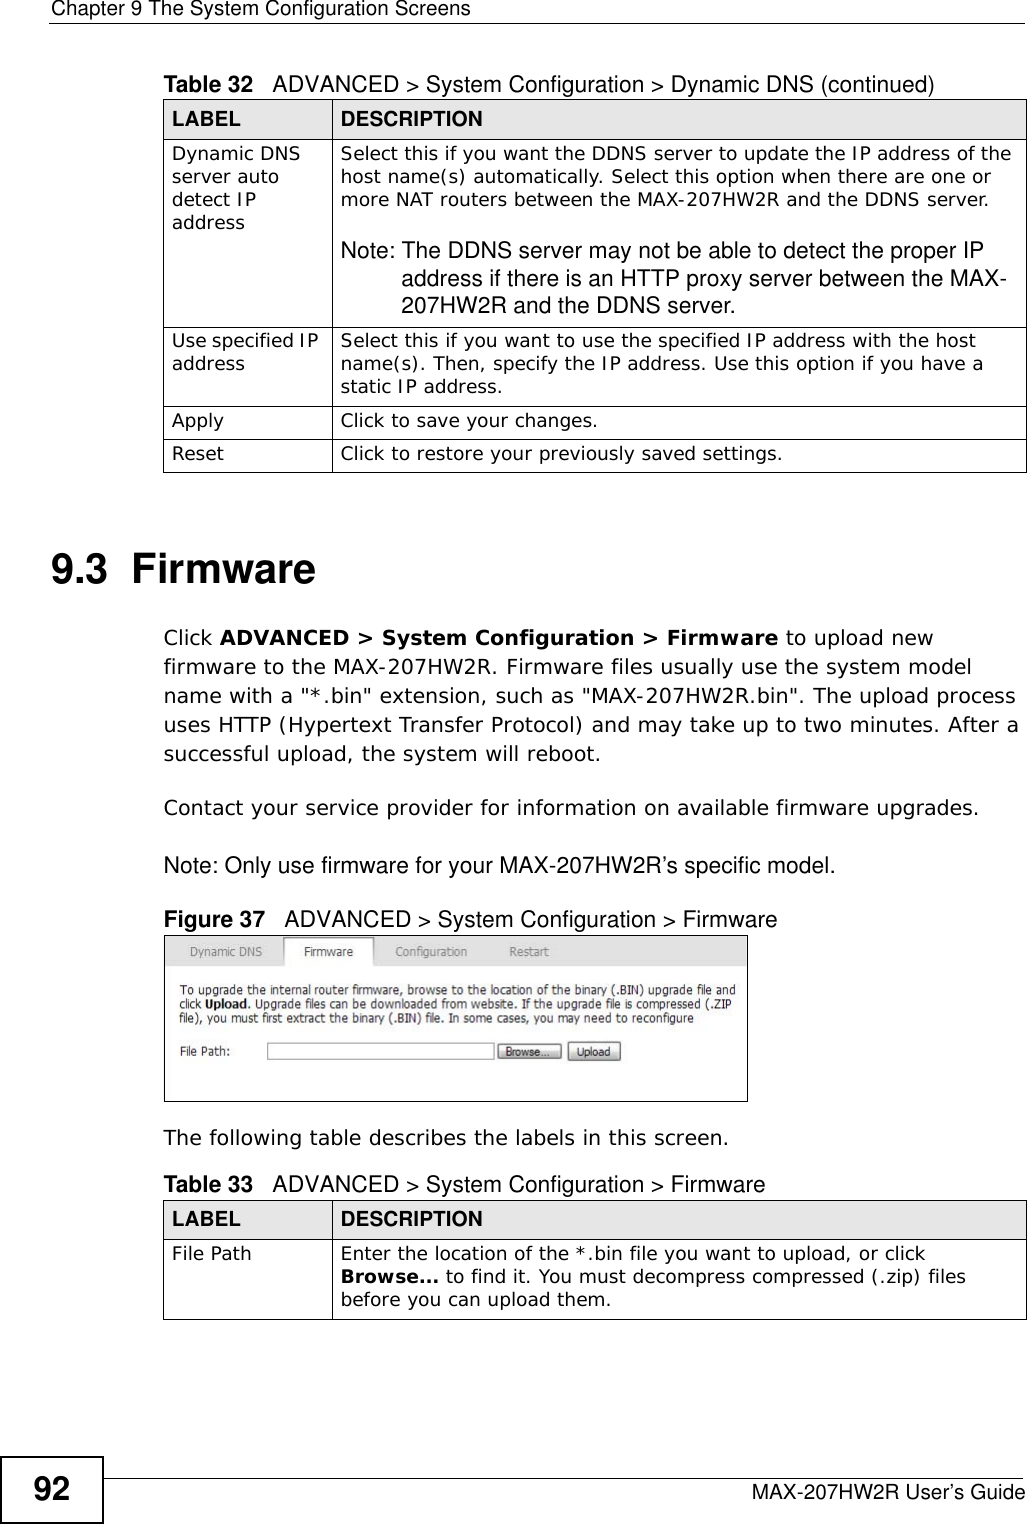 Chapter 9 The System Configuration ScreensMAX-207HW2R User’s Guide929.3  FirmwareClick ADVANCED &gt; System Configuration &gt; Firmware to upload new firmware to the MAX-207HW2R. Firmware files usually use the system model name with a &quot;*.bin&quot; extension, such as &quot;MAX-207HW2R.bin&quot;. The upload process uses HTTP (Hypertext Transfer Protocol) and may take up to two minutes. After a successful upload, the system will reboot. Contact your service provider for information on available firmware upgrades.Note: Only use firmware for your MAX-207HW2R’s specific model.Figure 37   ADVANCED &gt; System Configuration &gt; FirmwareThe following table describes the labels in this screen.Dynamic DNS server auto detect IP addressSelect this if you want the DDNS server to update the IP address of the host name(s) automatically. Select this option when there are one or more NAT routers between the MAX-207HW2R and the DDNS server.Note: The DDNS server may not be able to detect the proper IP address if there is an HTTP proxy server between the MAX-207HW2R and the DDNS server.Use specified IP address  Select this if you want to use the specified IP address with the host name(s). Then, specify the IP address. Use this option if you have a static IP address.Apply Click to save your changes.Reset Click to restore your previously saved settings.Table 32   ADVANCED &gt; System Configuration &gt; Dynamic DNS (continued)LABEL DESCRIPTIONTable 33   ADVANCED &gt; System Configuration &gt; FirmwareLABEL DESCRIPTIONFile Path Enter the location of the *.bin file you want to upload, or click Browse... to find it. You must decompress compressed (.zip) files before you can upload them.